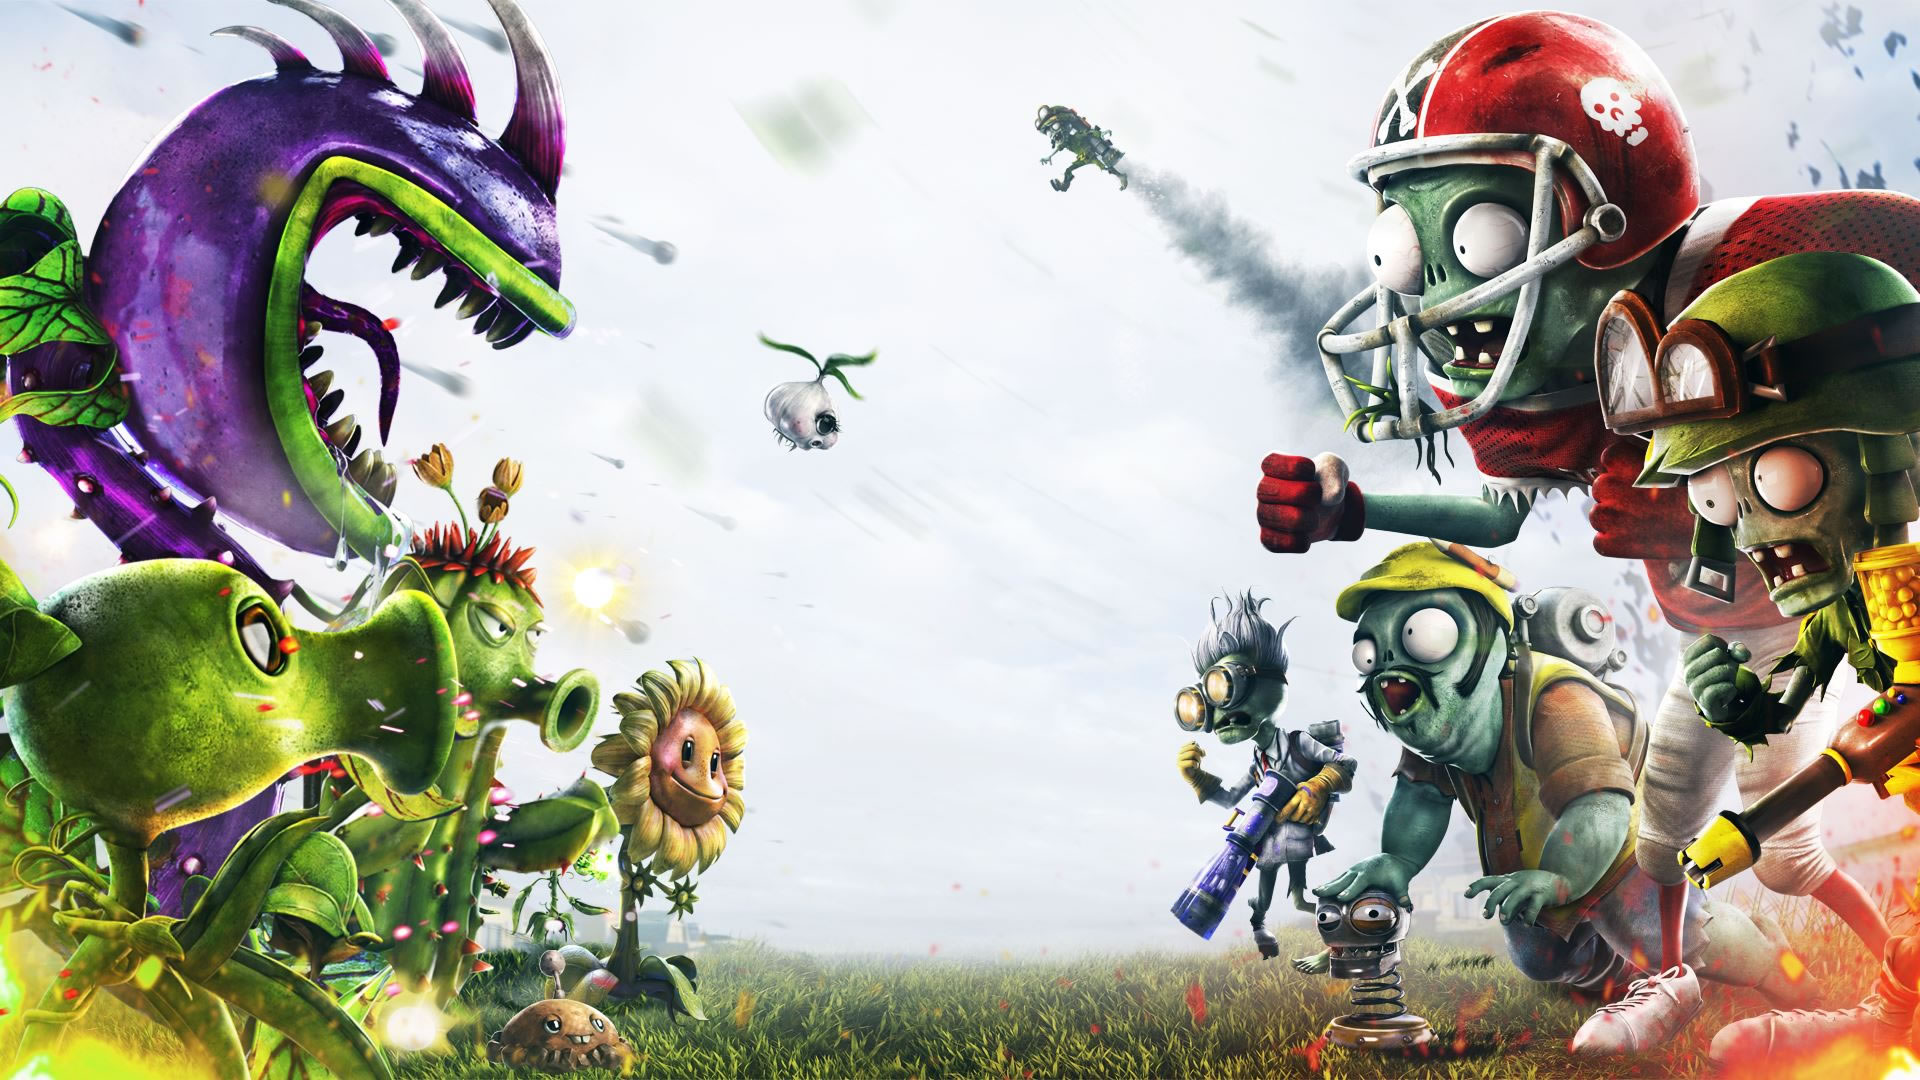 plants vs zombies 3 release date usa